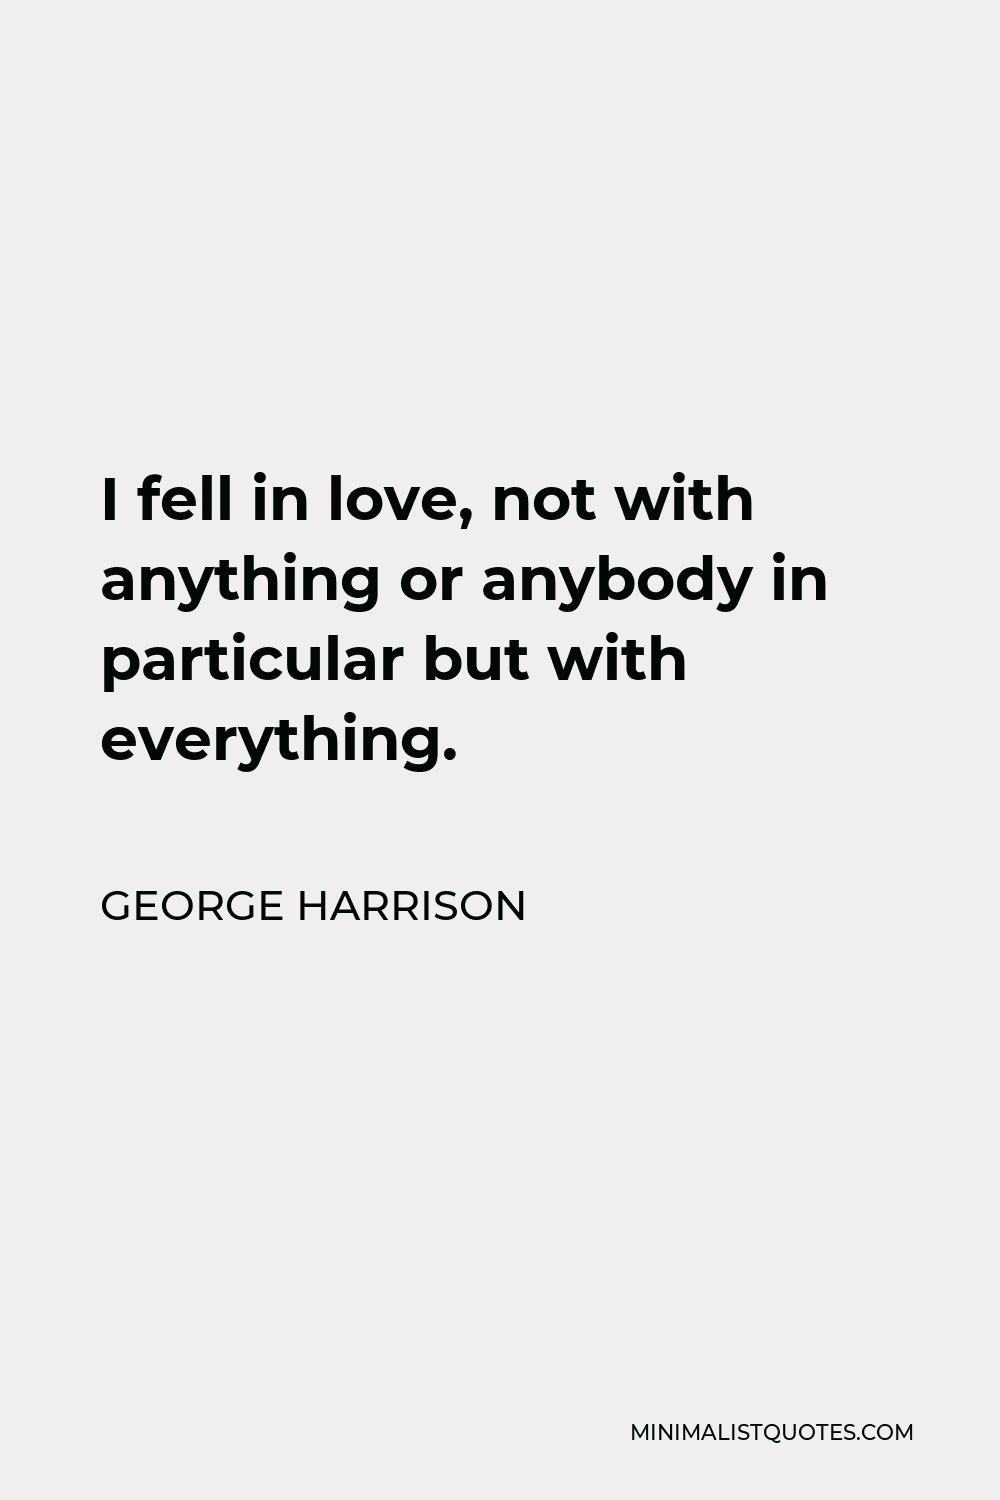 George Harrison Quote - I fell in love, not with anything or anybody in particular but with everything.